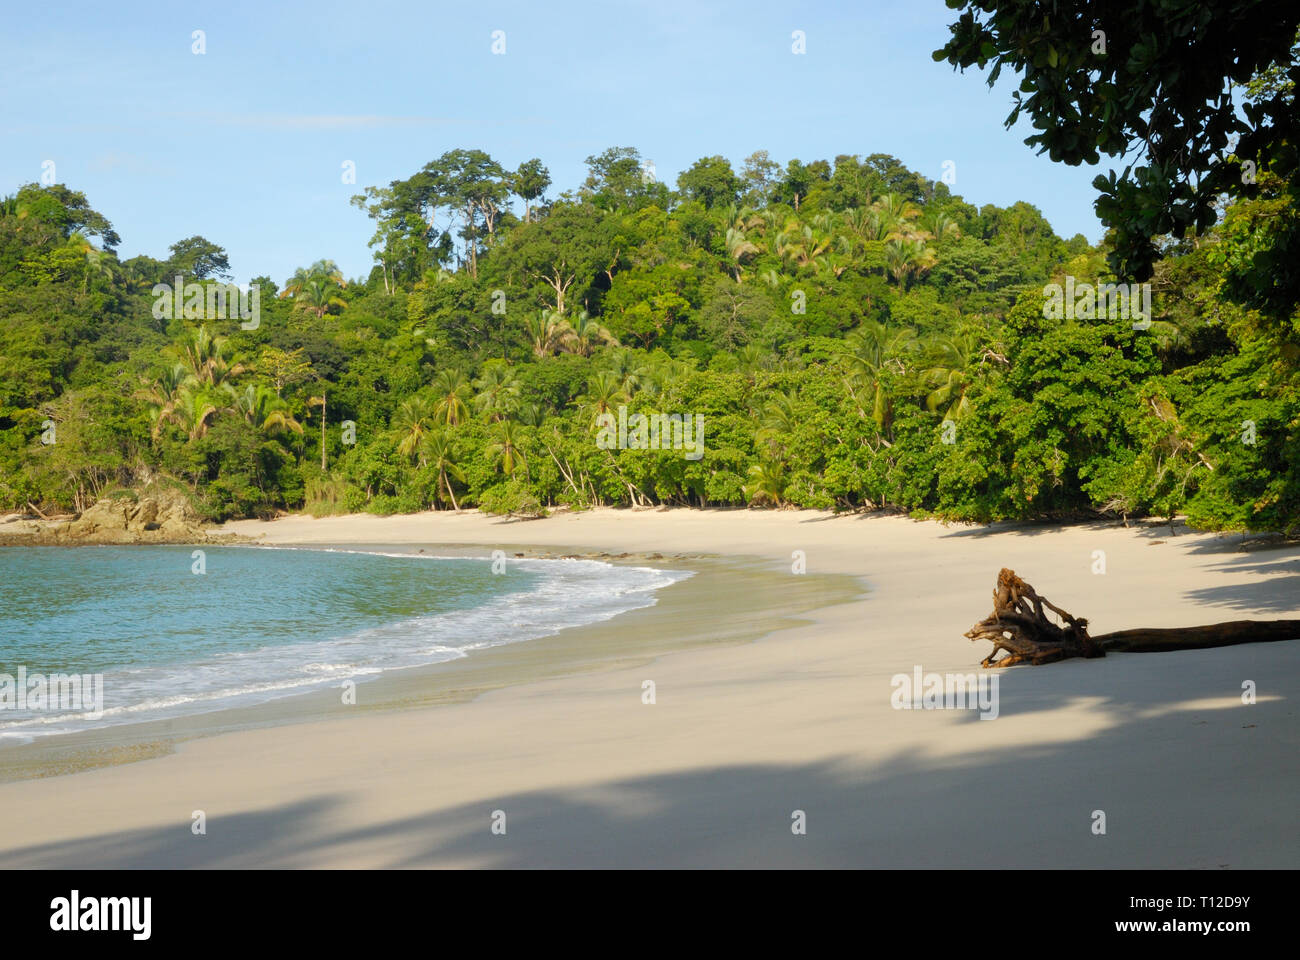 Tranquil La Macha Beach, Costa Rica, deserted in the early morning Stock Photo